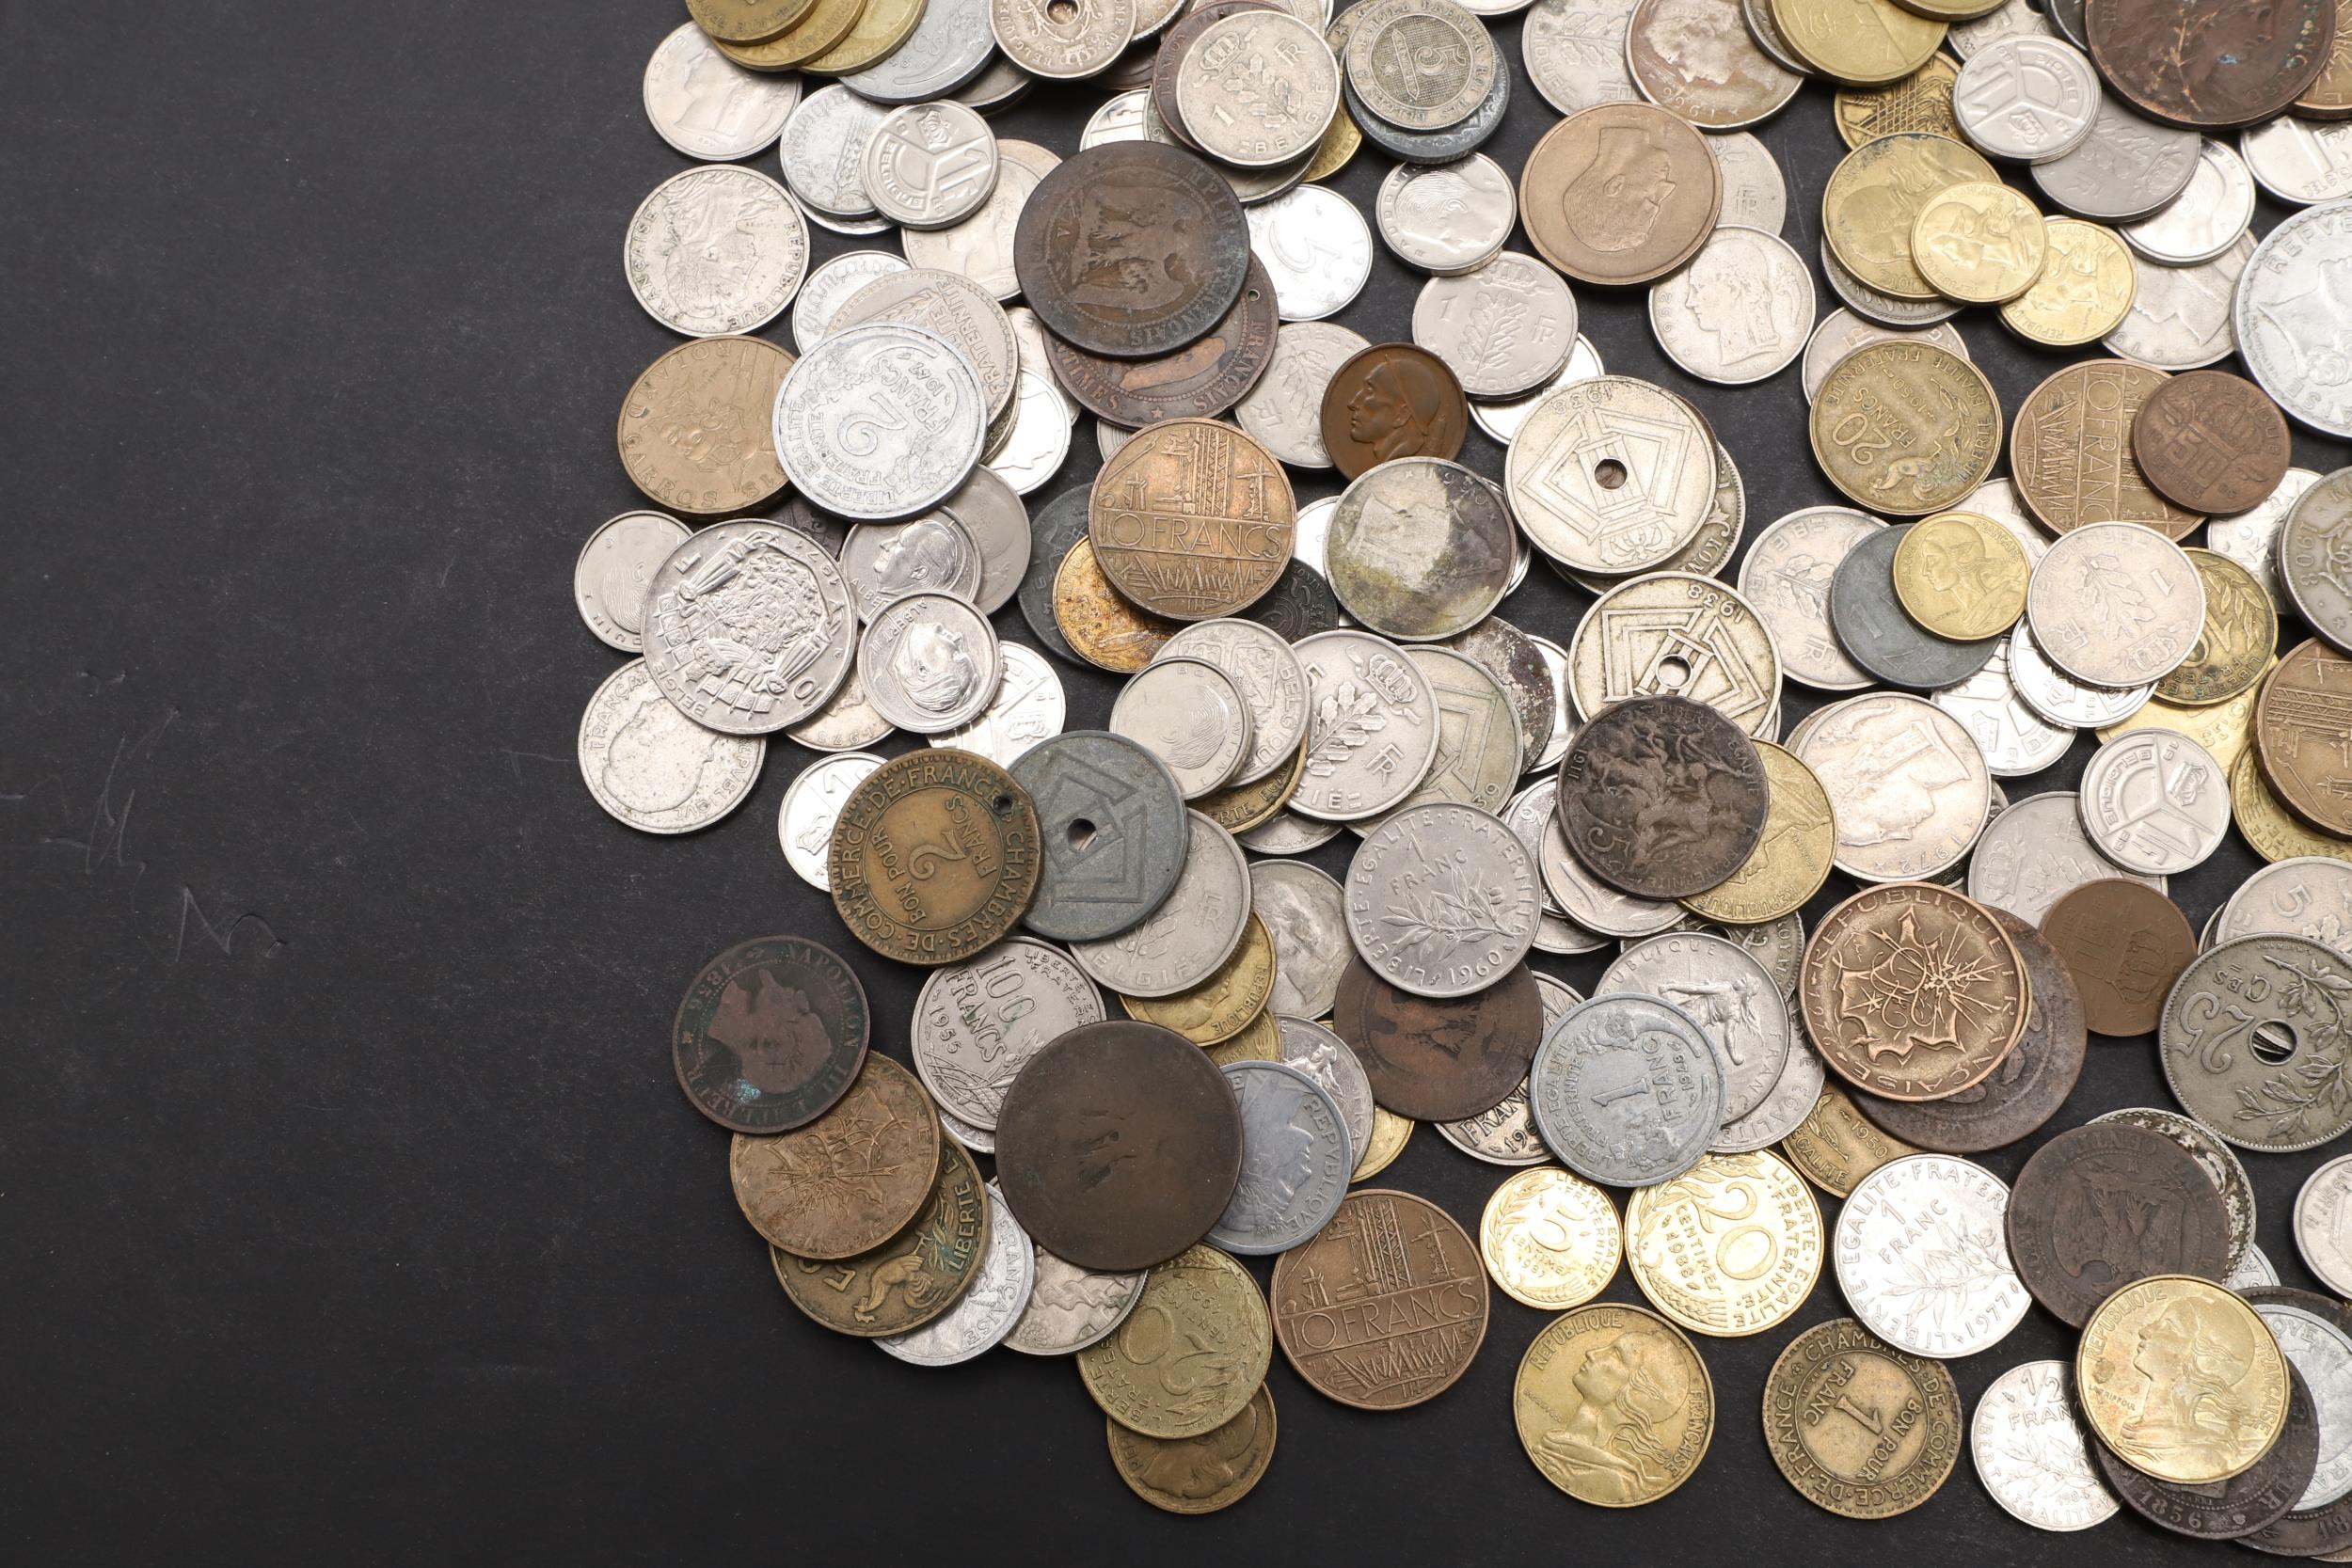 A COLLECTION OF 19TH AND 20TH CENTURY FRENCH AND BELGIAN COINS. - Image 8 of 10